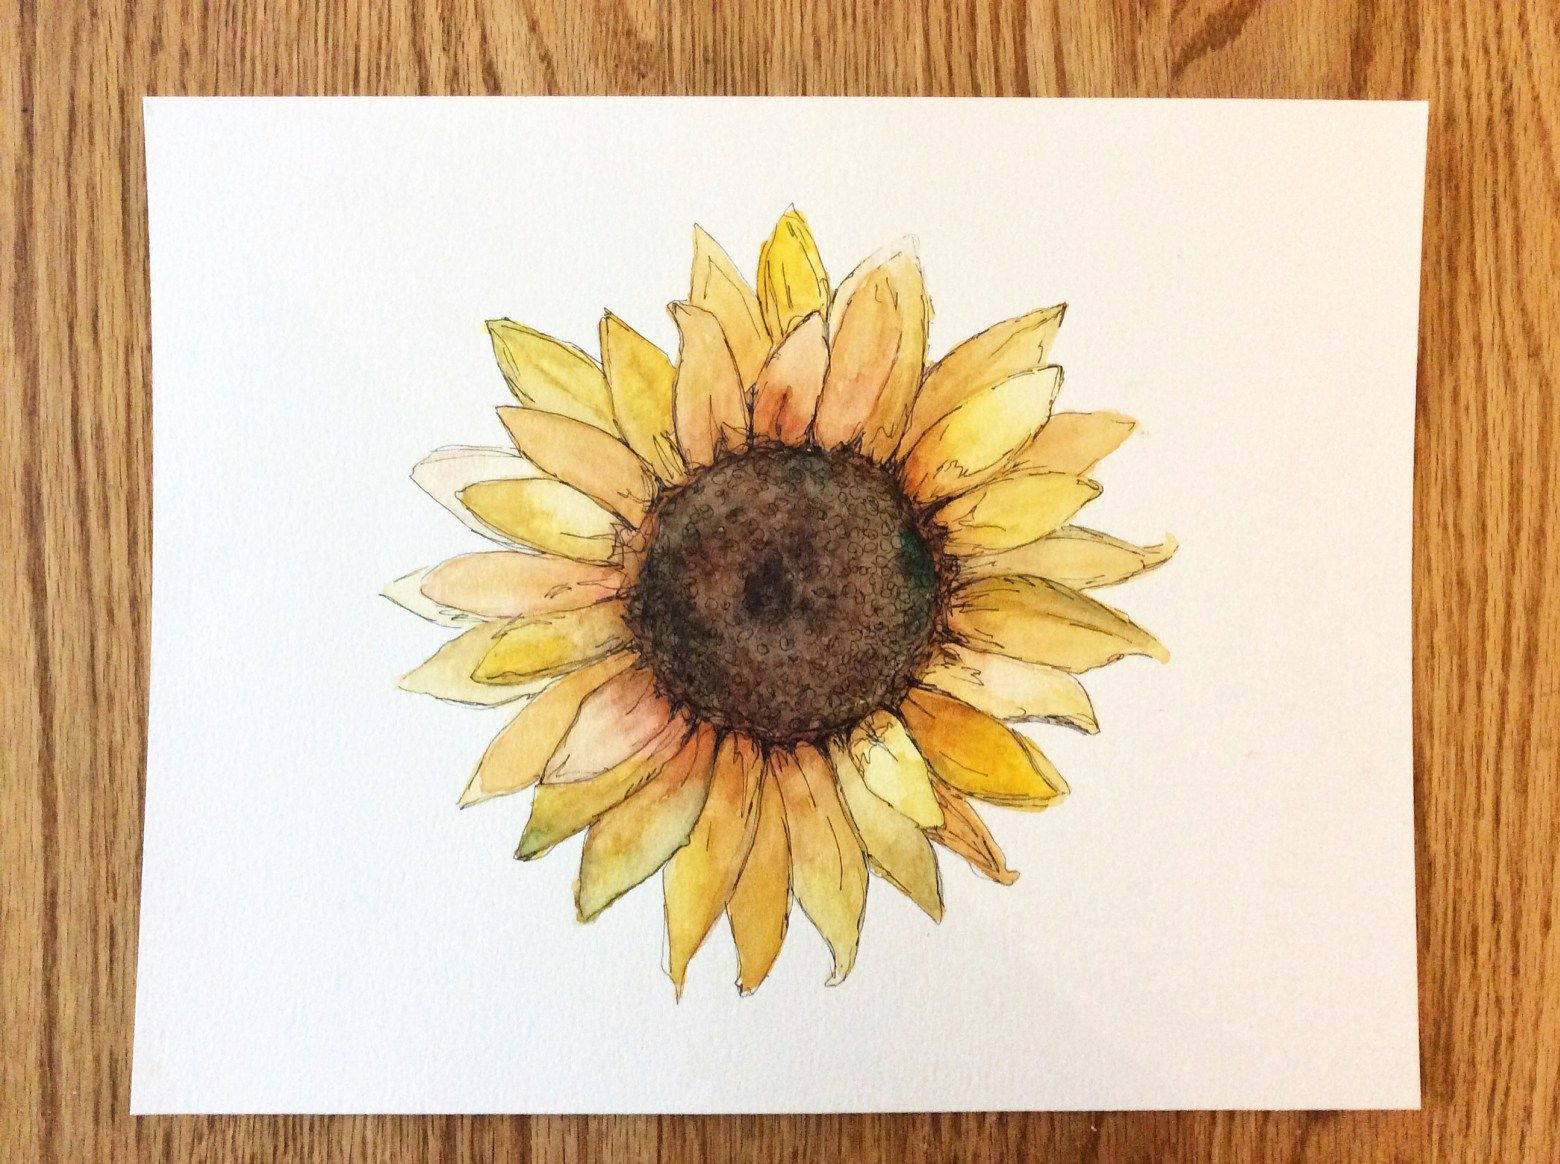 Drawings Of Summer Flowers Sun Flower Watercolour Stay Tuned for New Prints Available In Our